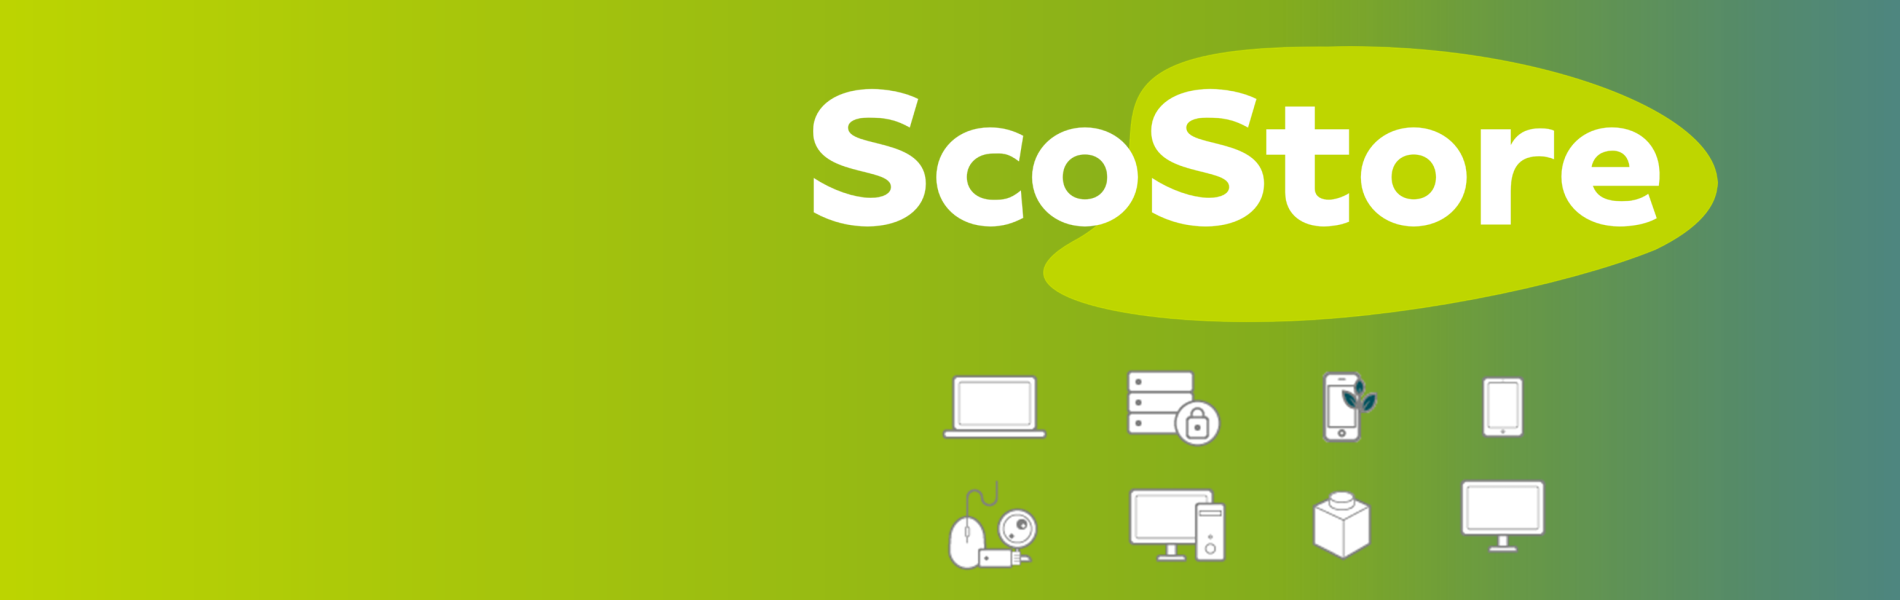 Banner for ScoStore with icons below logo